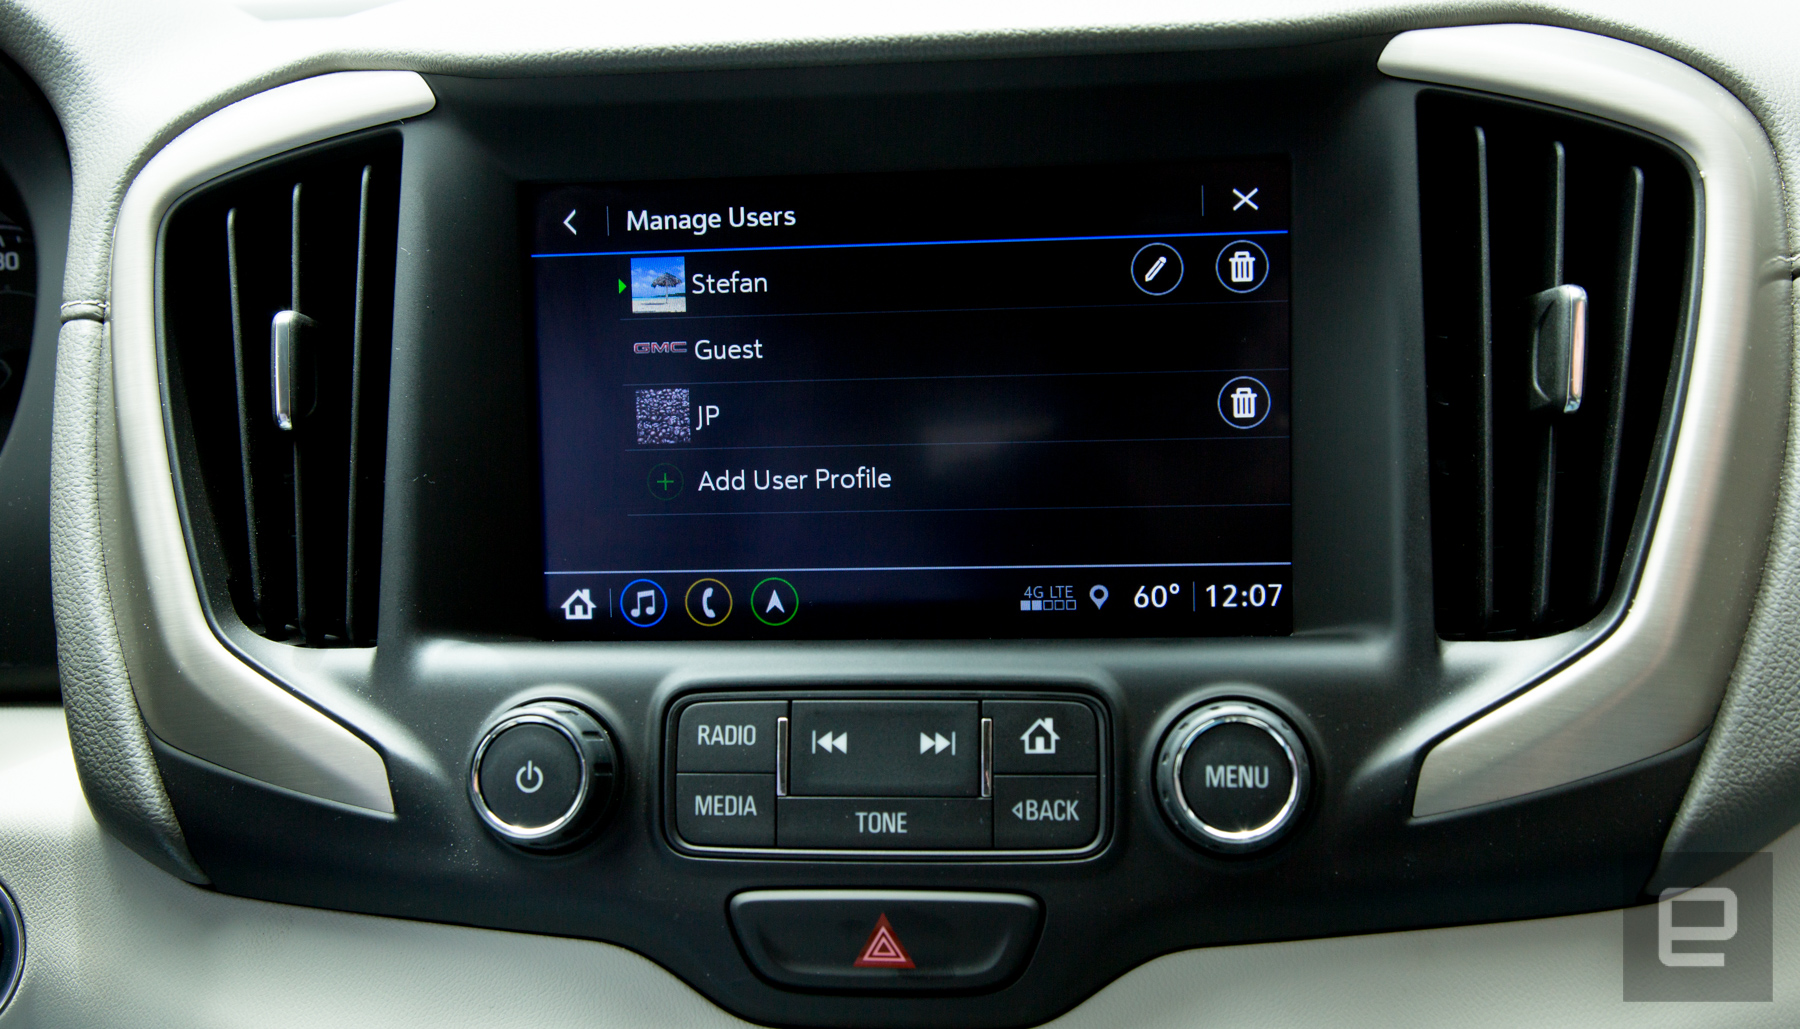 GM goes full-smartphone with its latest infotainment system 